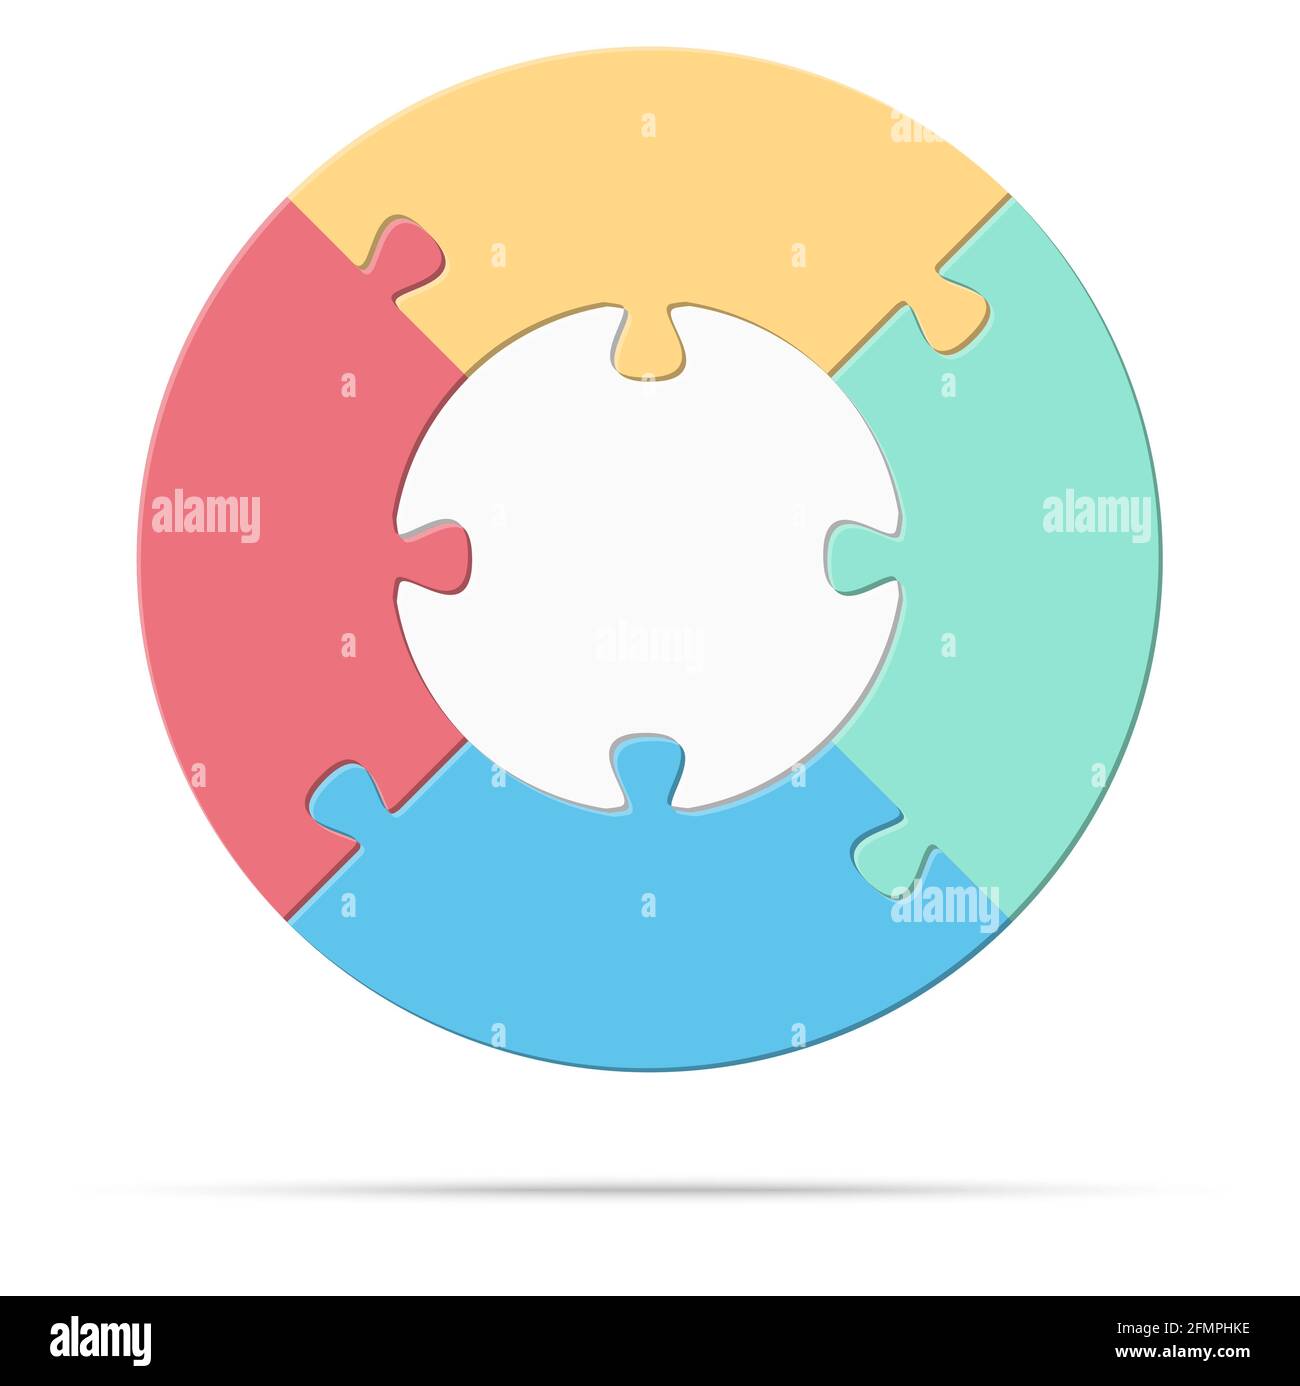 eps vector illustration of round colored puzzle symbolizing cooperation or teamwork process with white base, four options idea Stock Vector